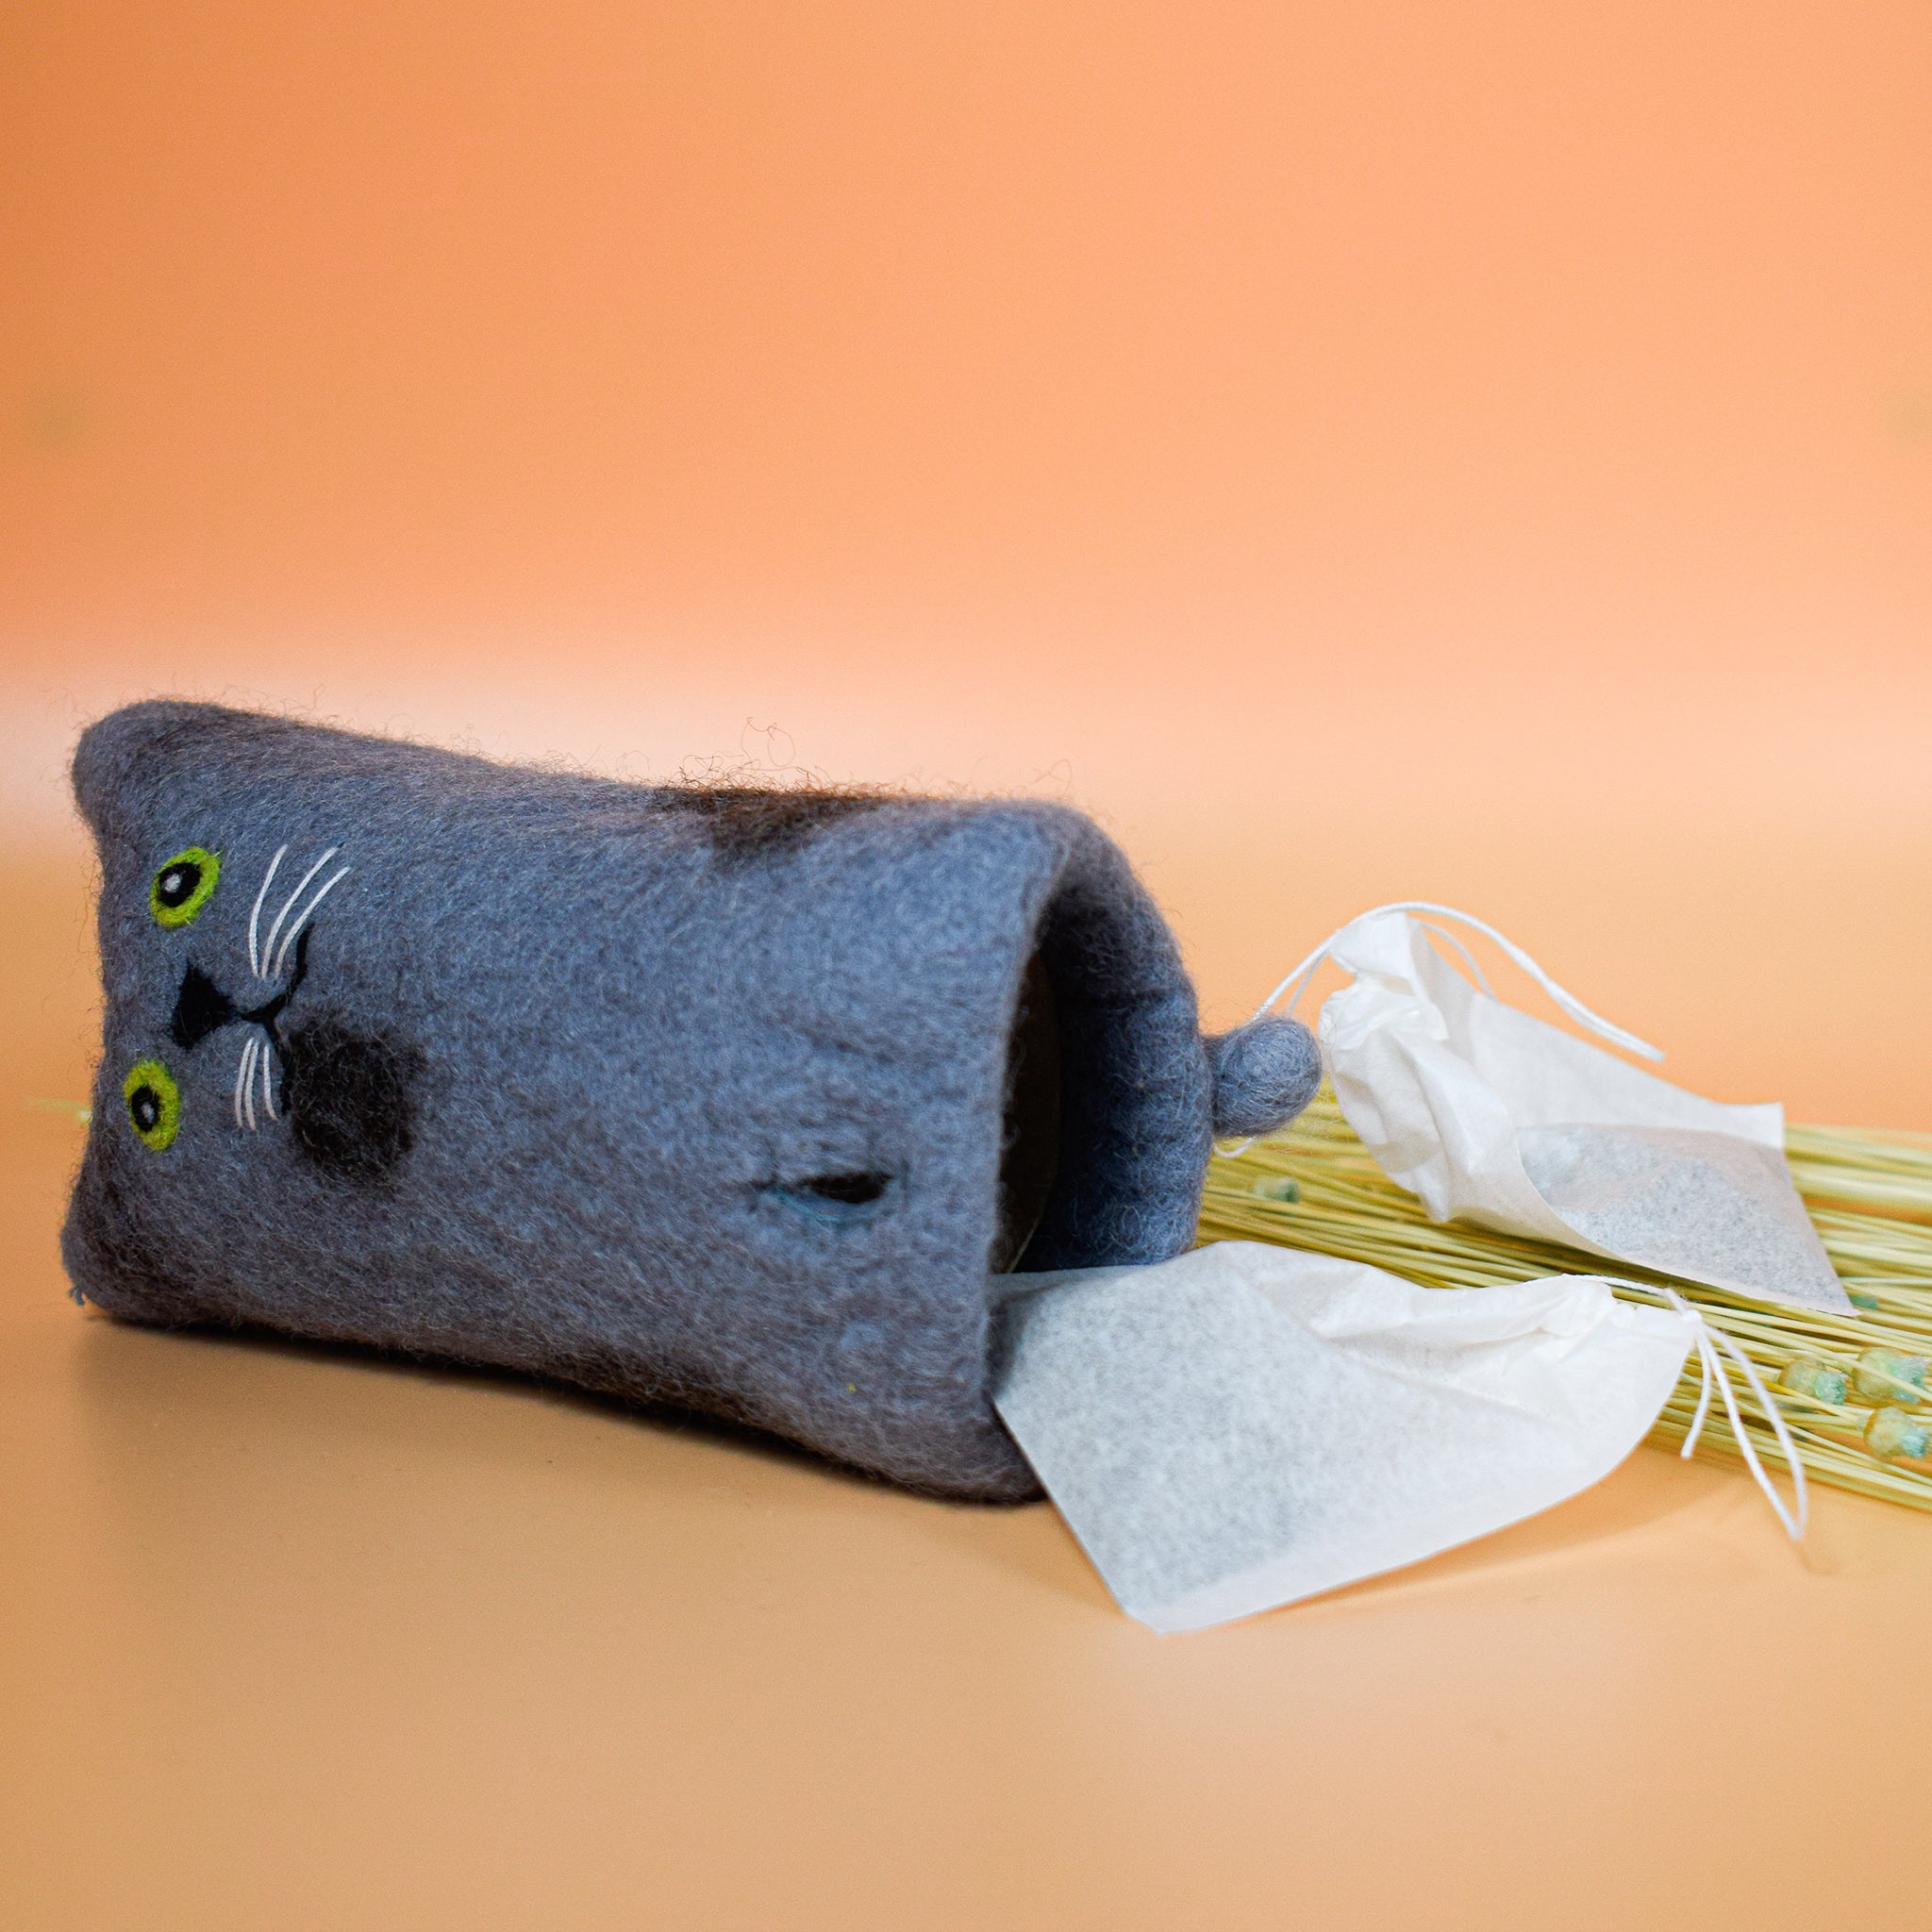 Hooman's Friend felted cat toy with ideas of what to put inside